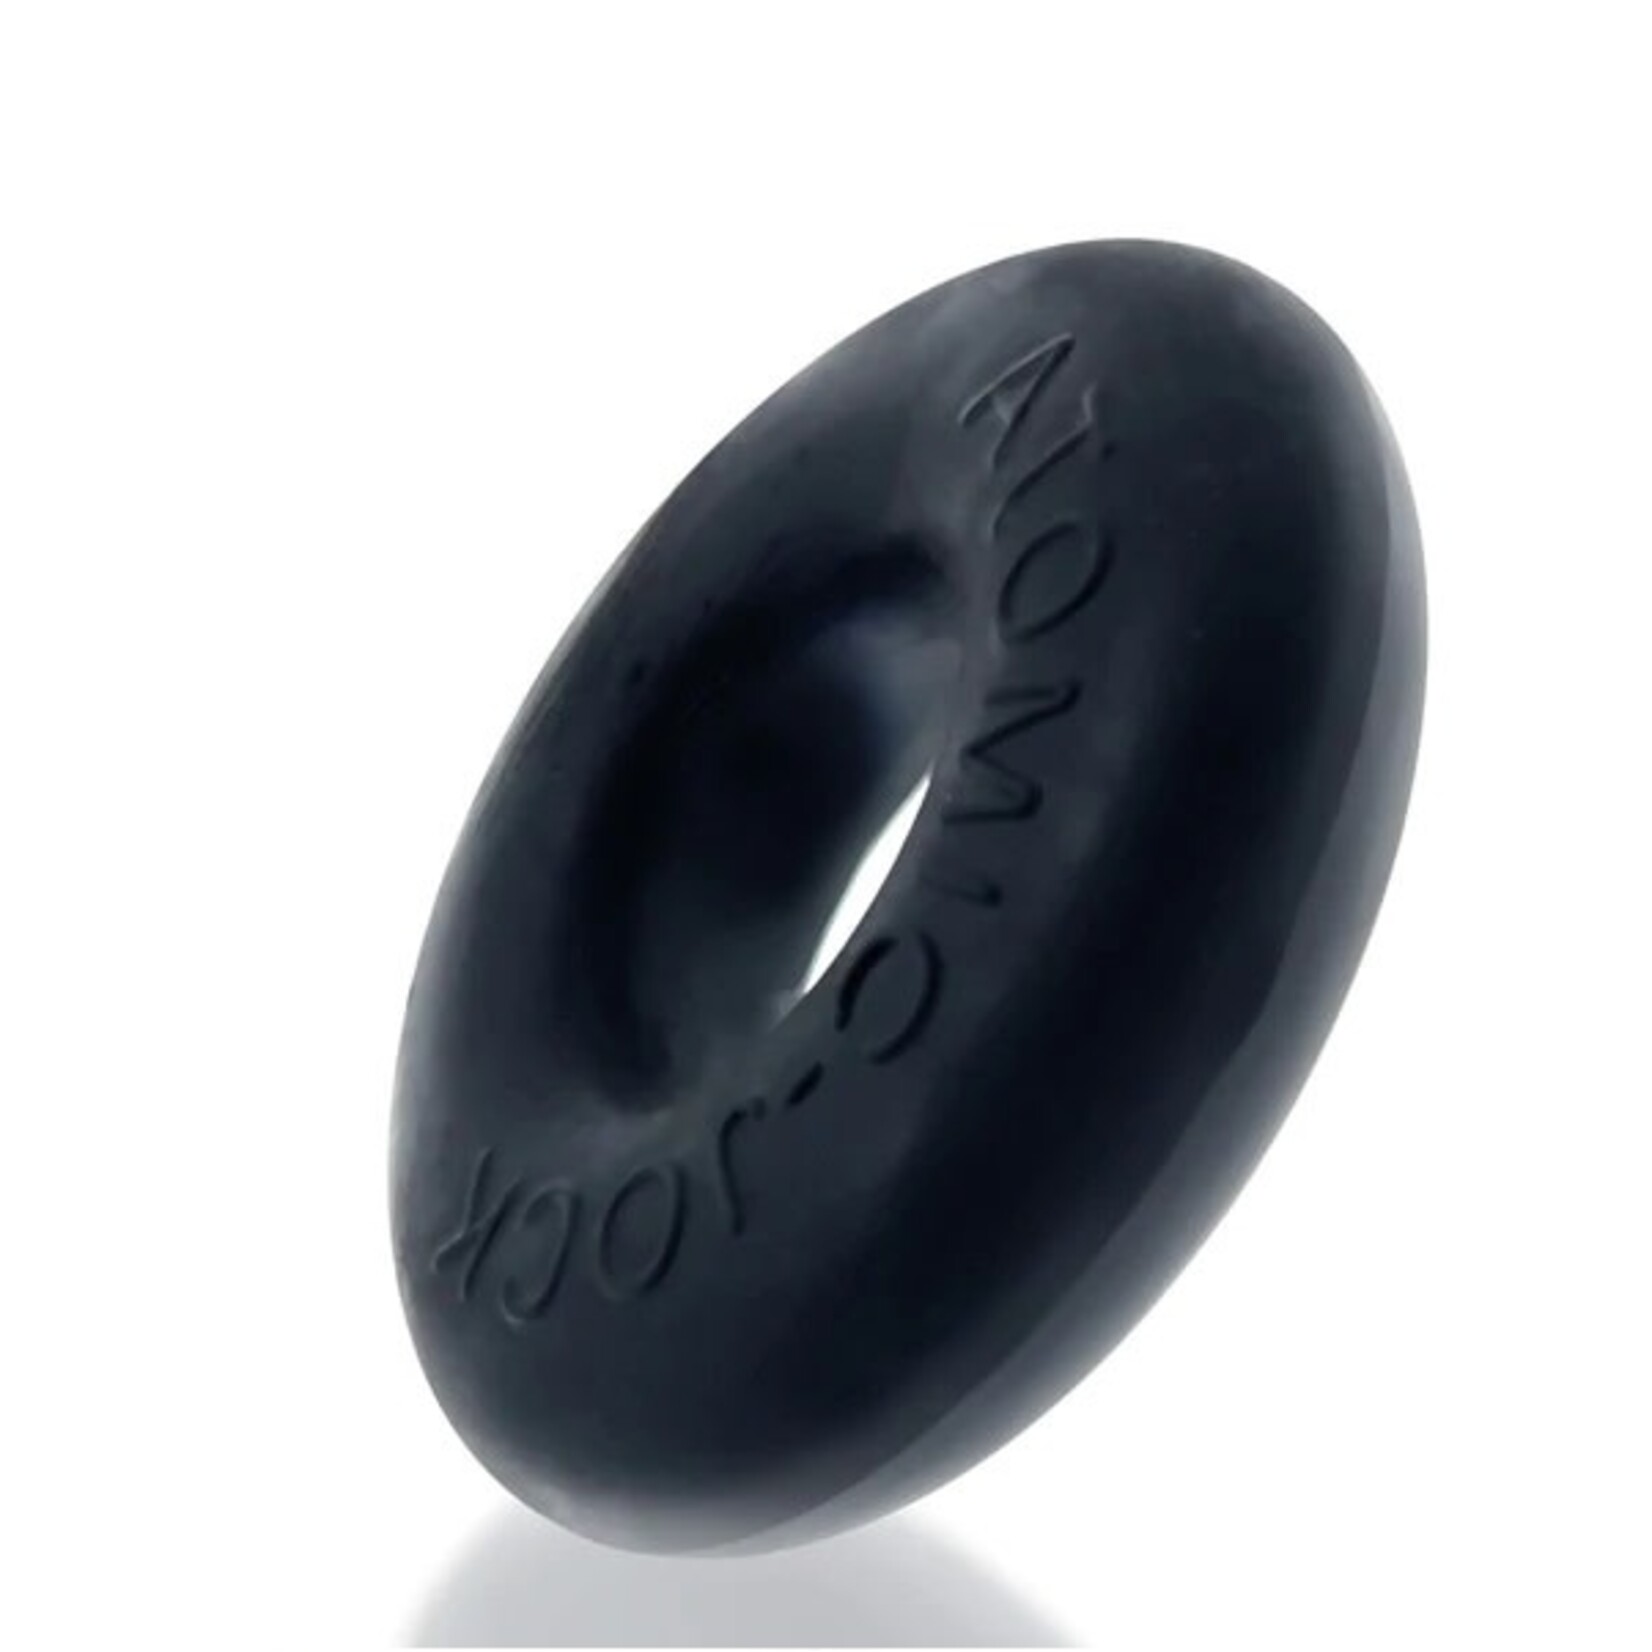 OXBALLS OXBALLS  NIGHT SPECIAL EDITION - DONUT 2 SILICONE COCK RING - BLACK